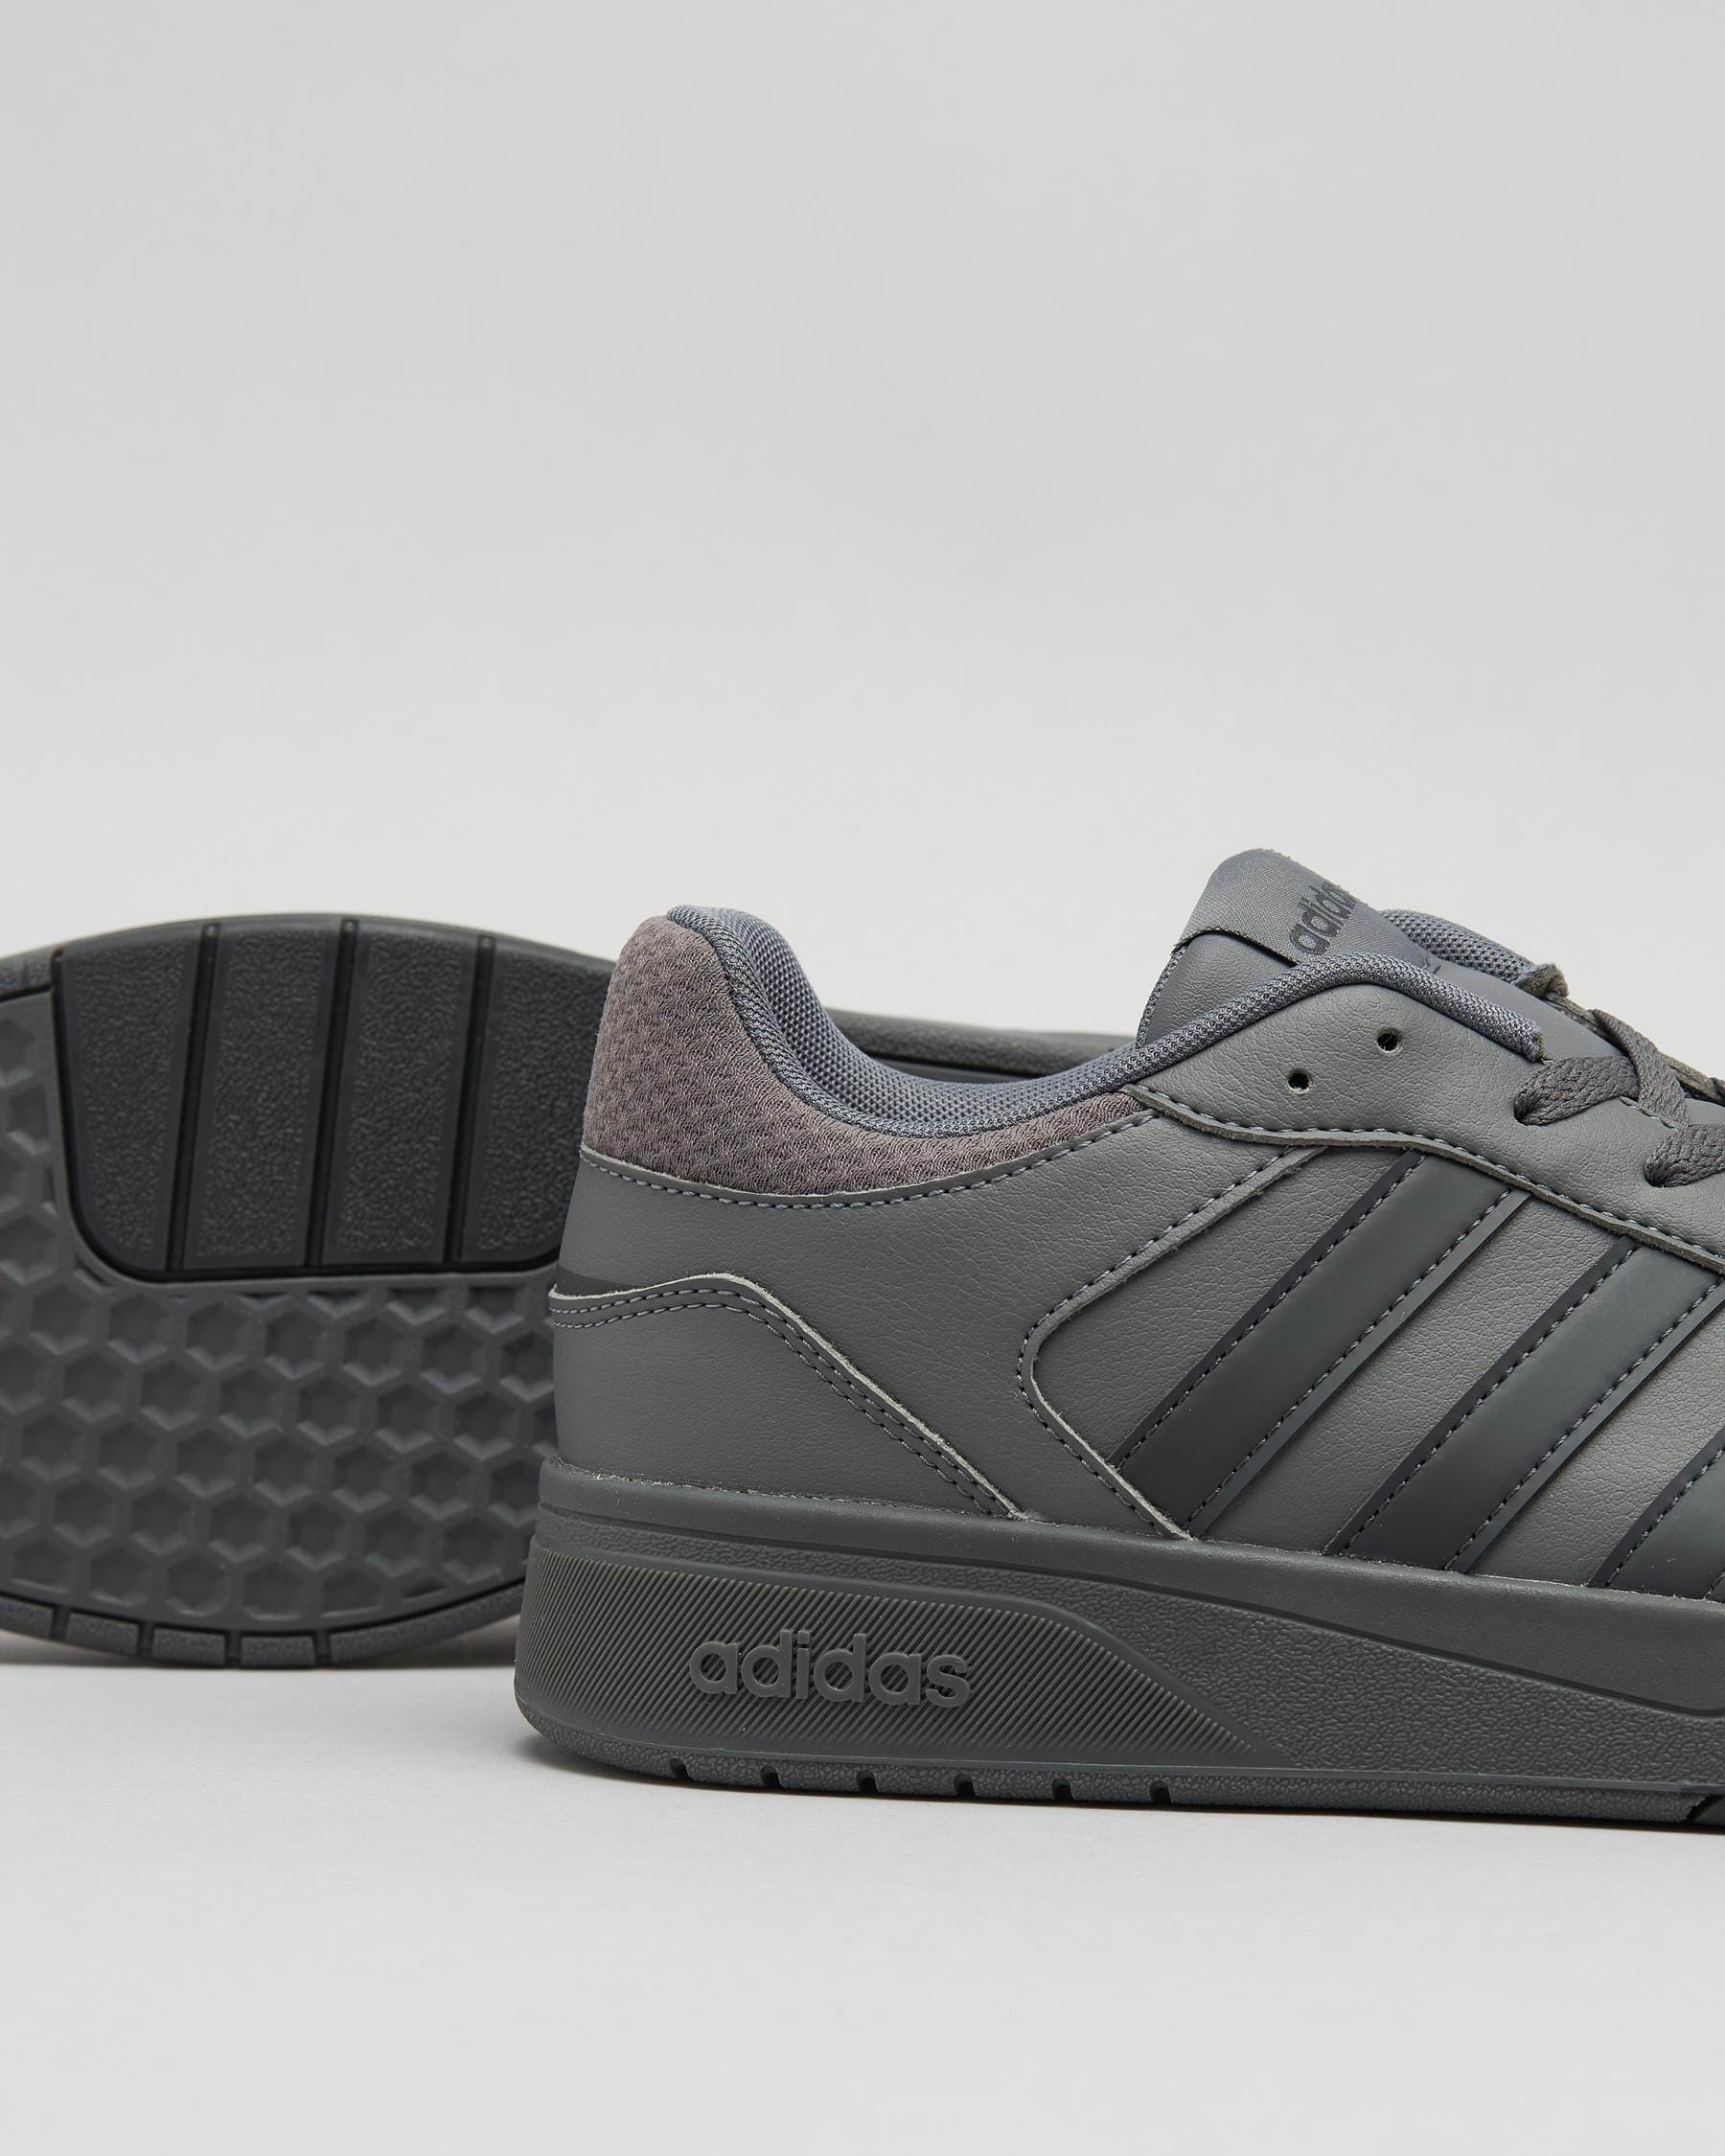 Adidas Courtbeat Shoes In Grey Five/carbon/core Black - Fast Shipping ...